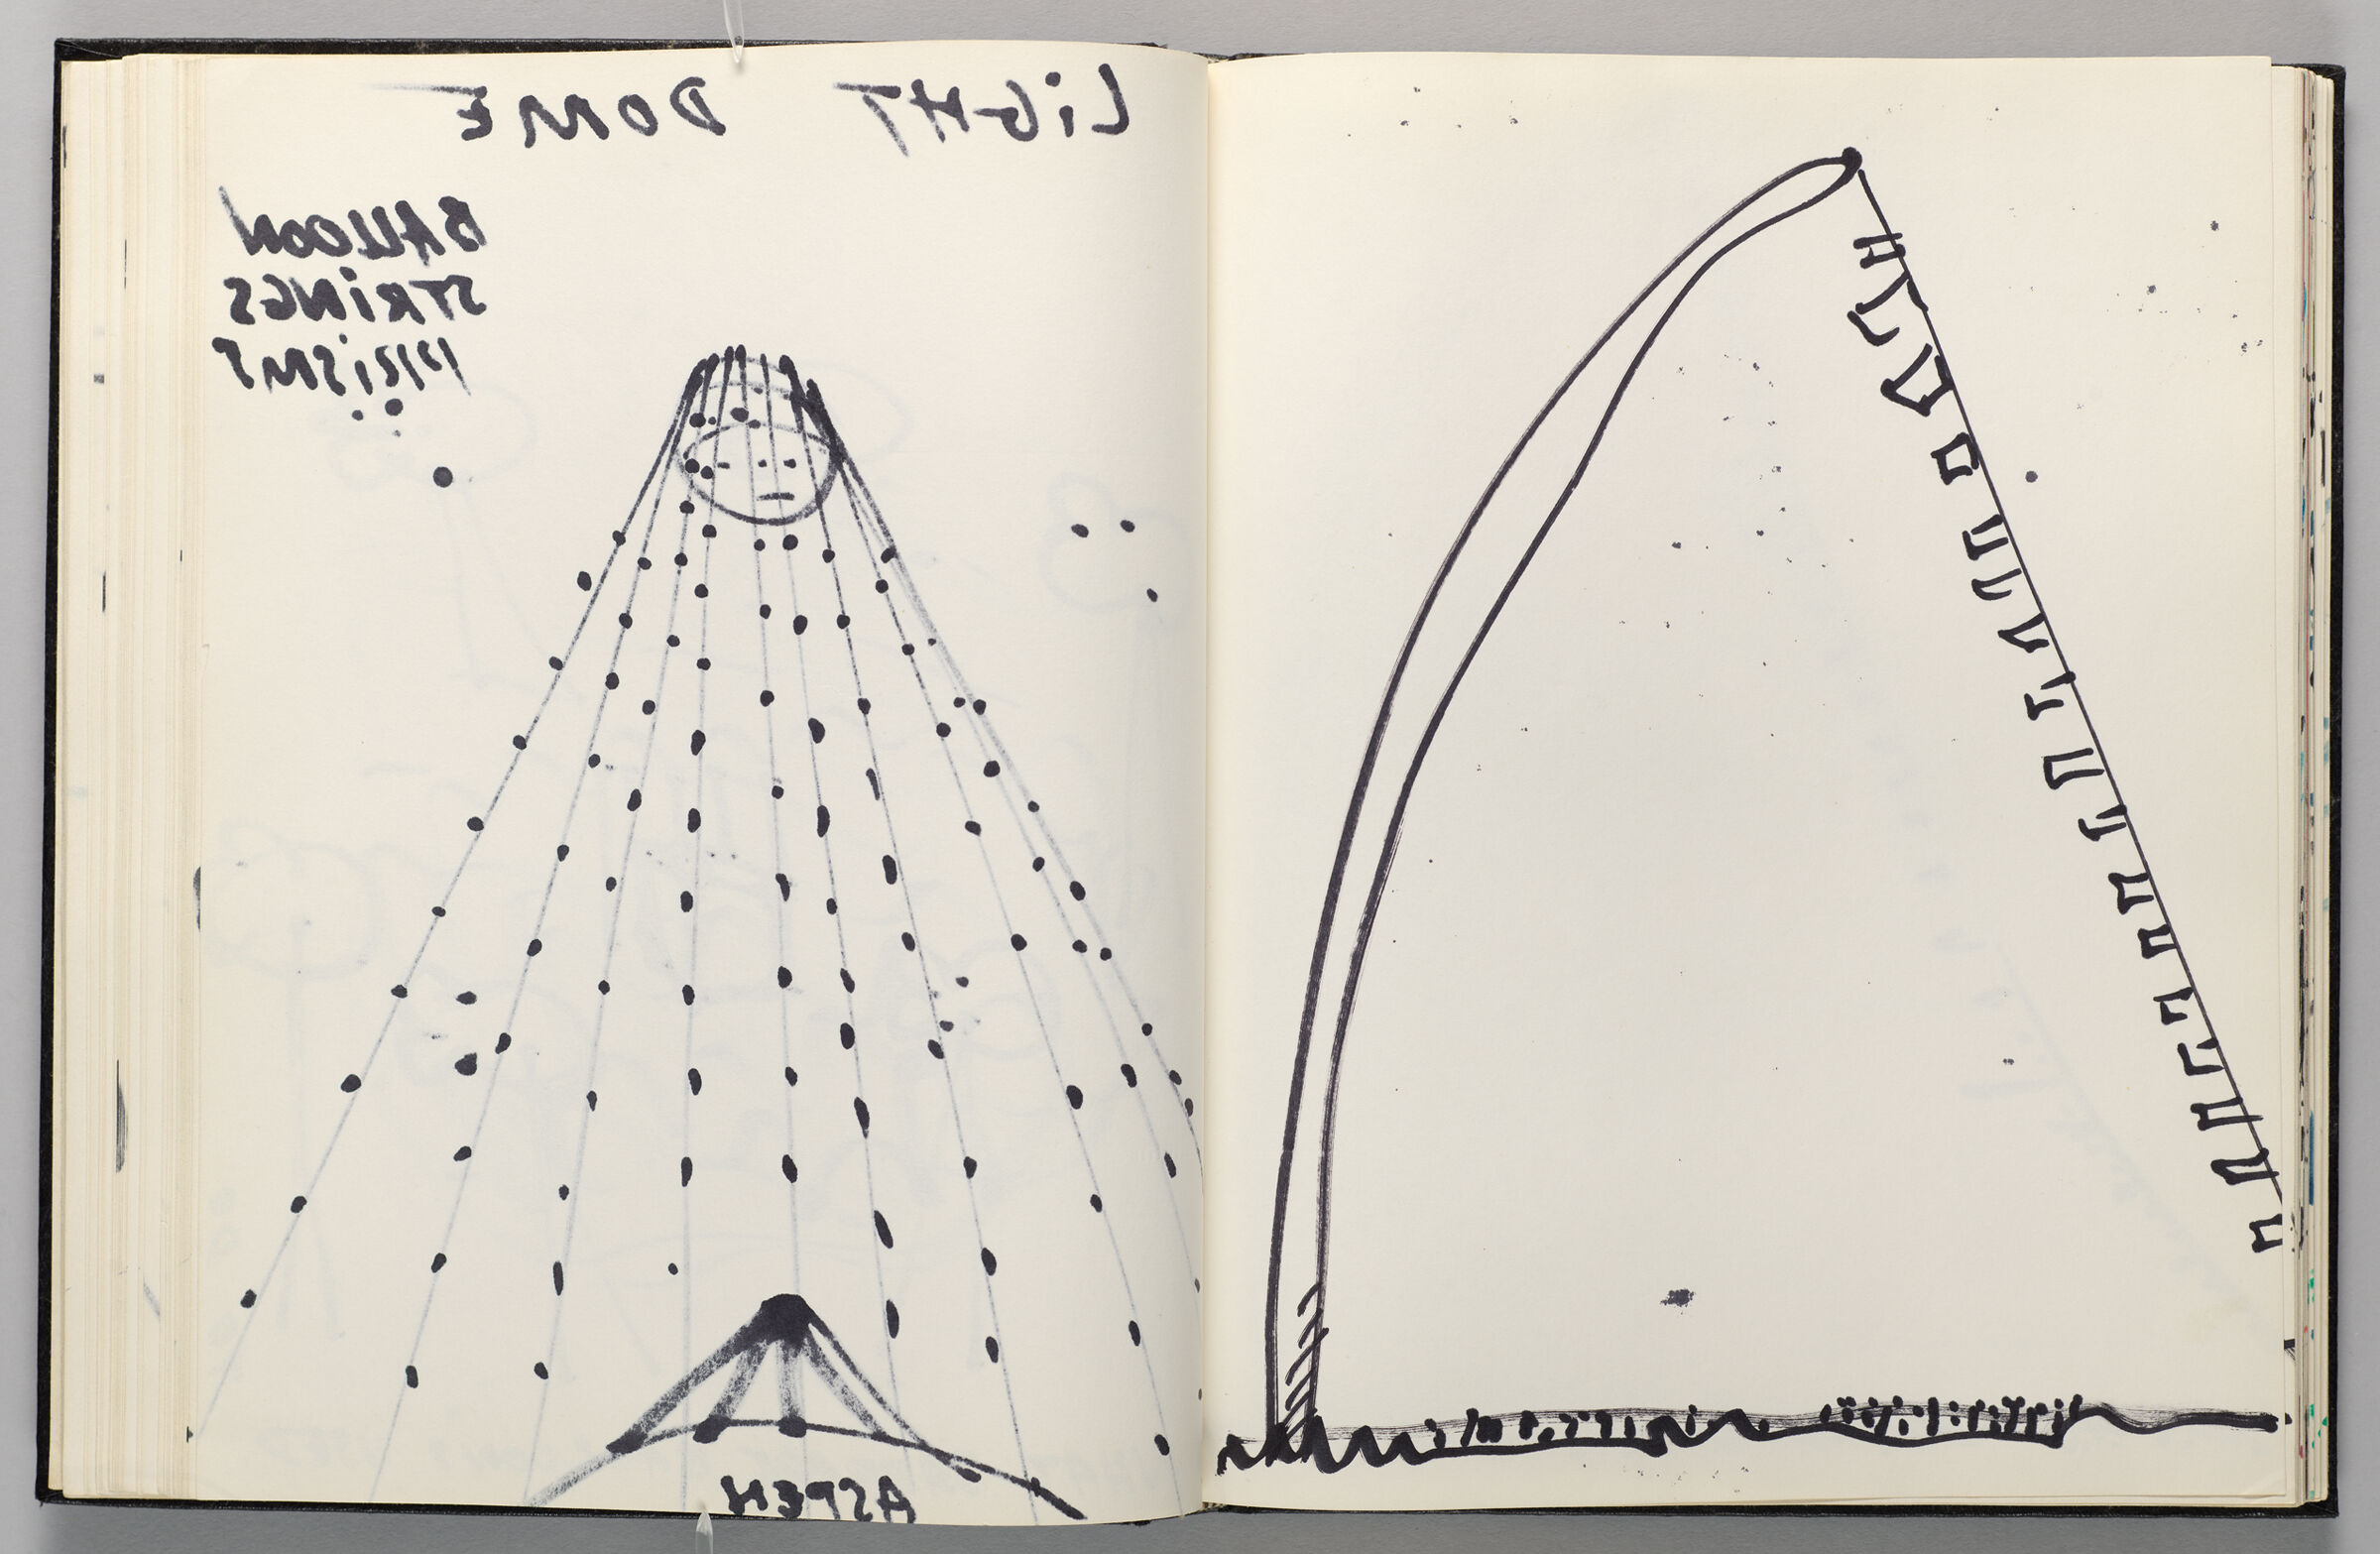 Untitled (Bleed-Through Of Previous Page, Left Page); Untitled (Sky Art, Right Page)